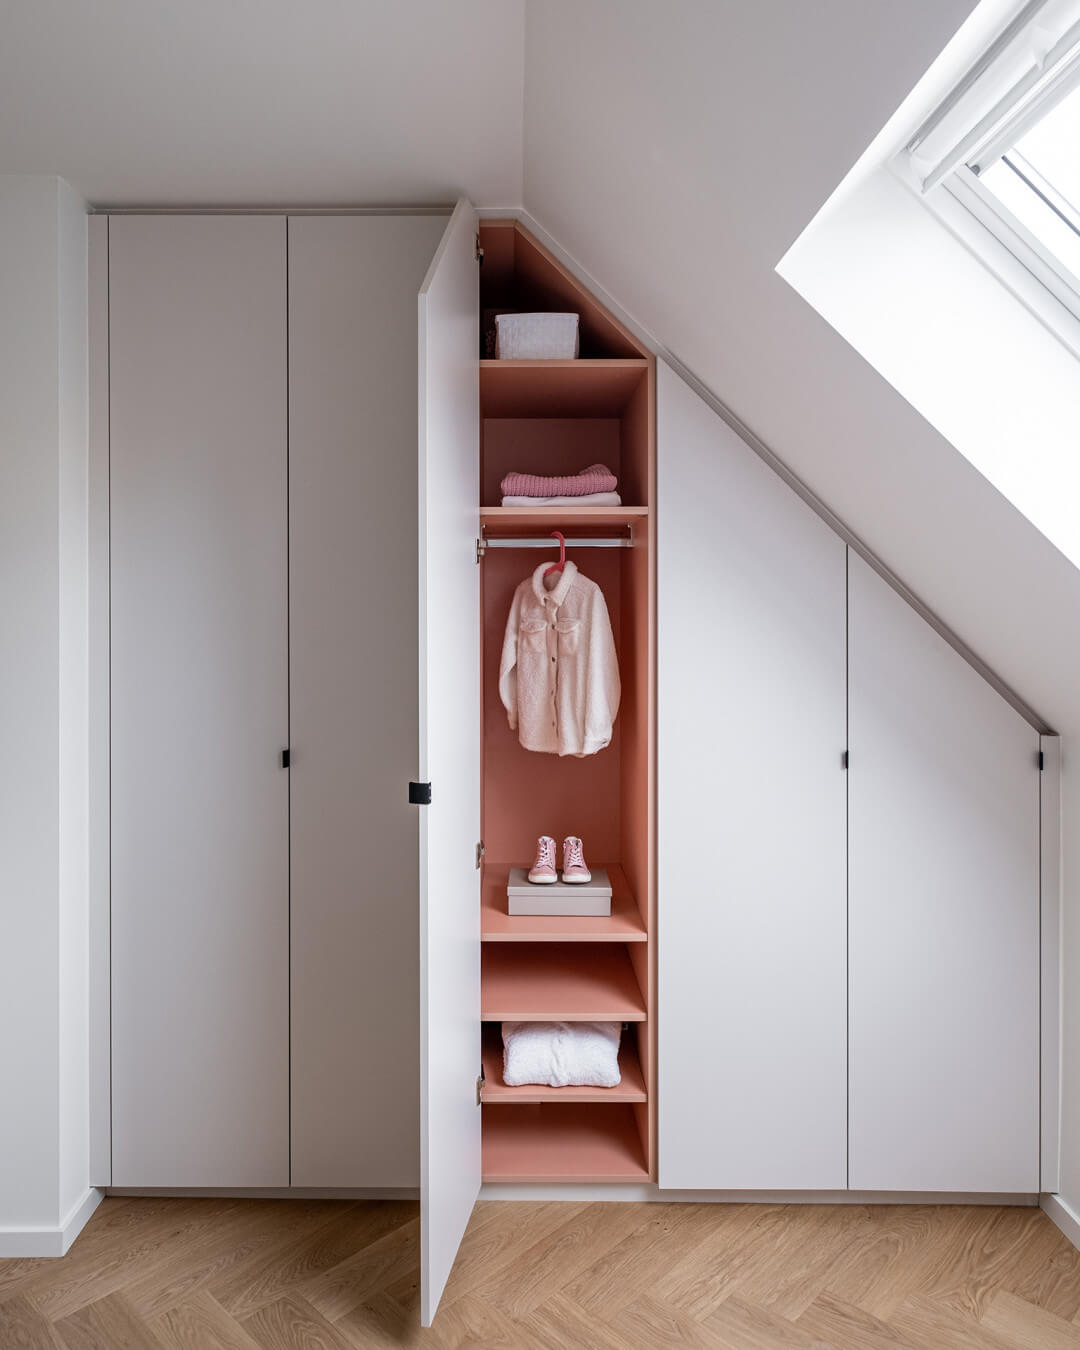 Custom built-in wardrobe under a sloping roof with a colorful interior.